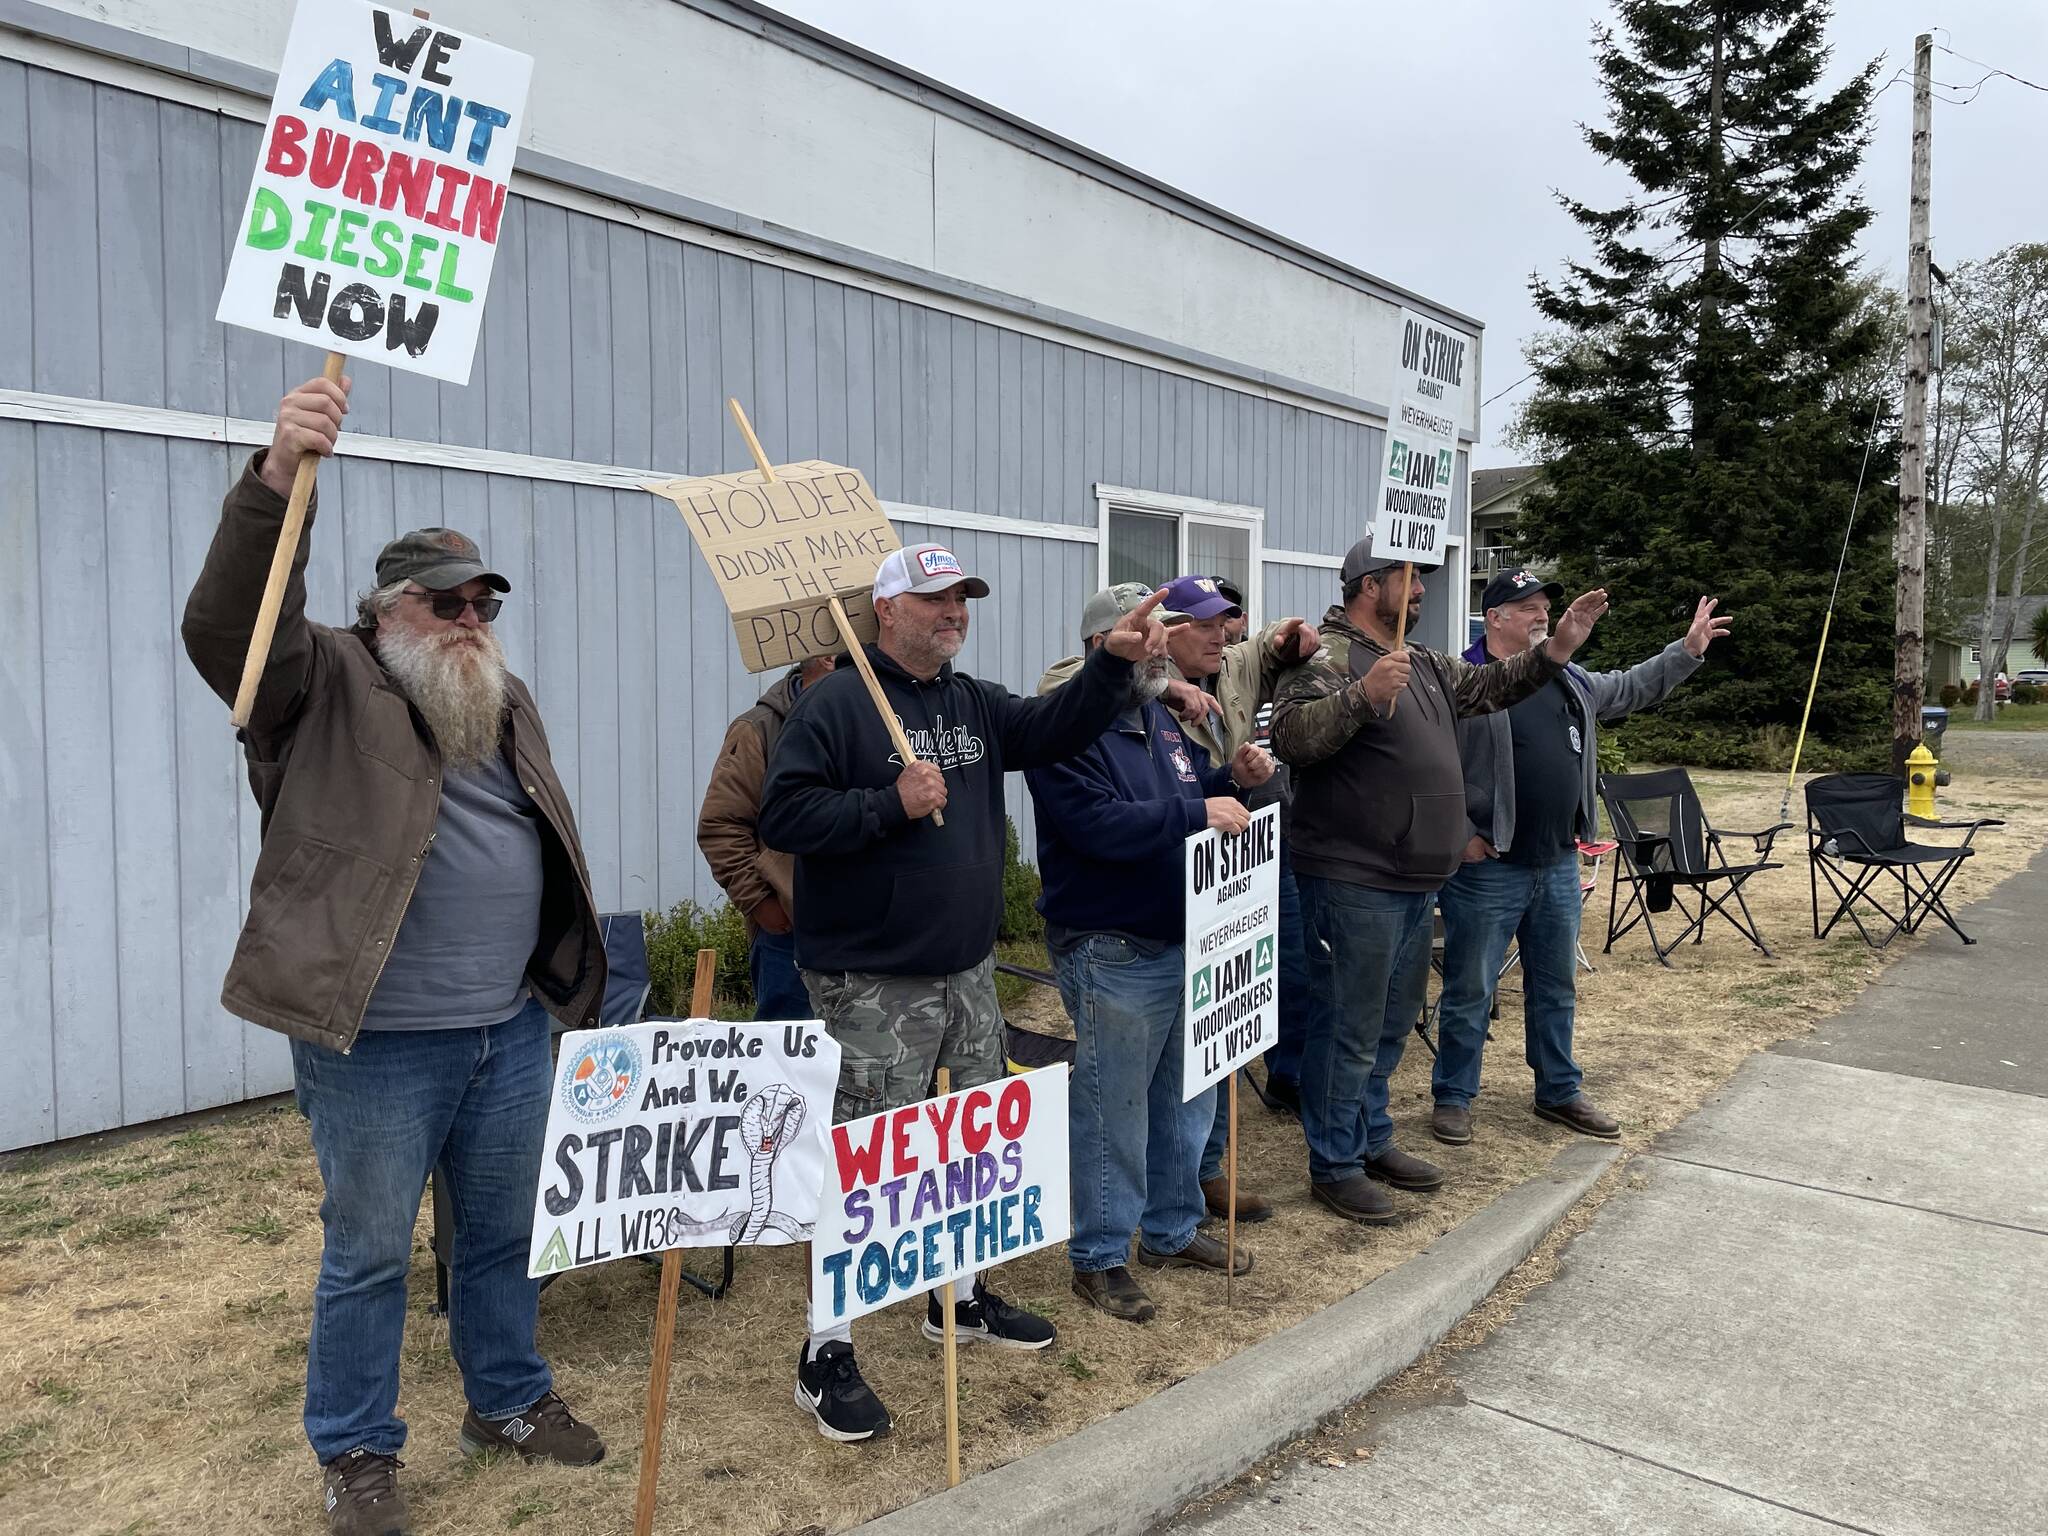 Michael S. Lockett / The Daily World
Union members picket against Weyerhaeuser near the company’s South Aberdeen facility on Tuesday.